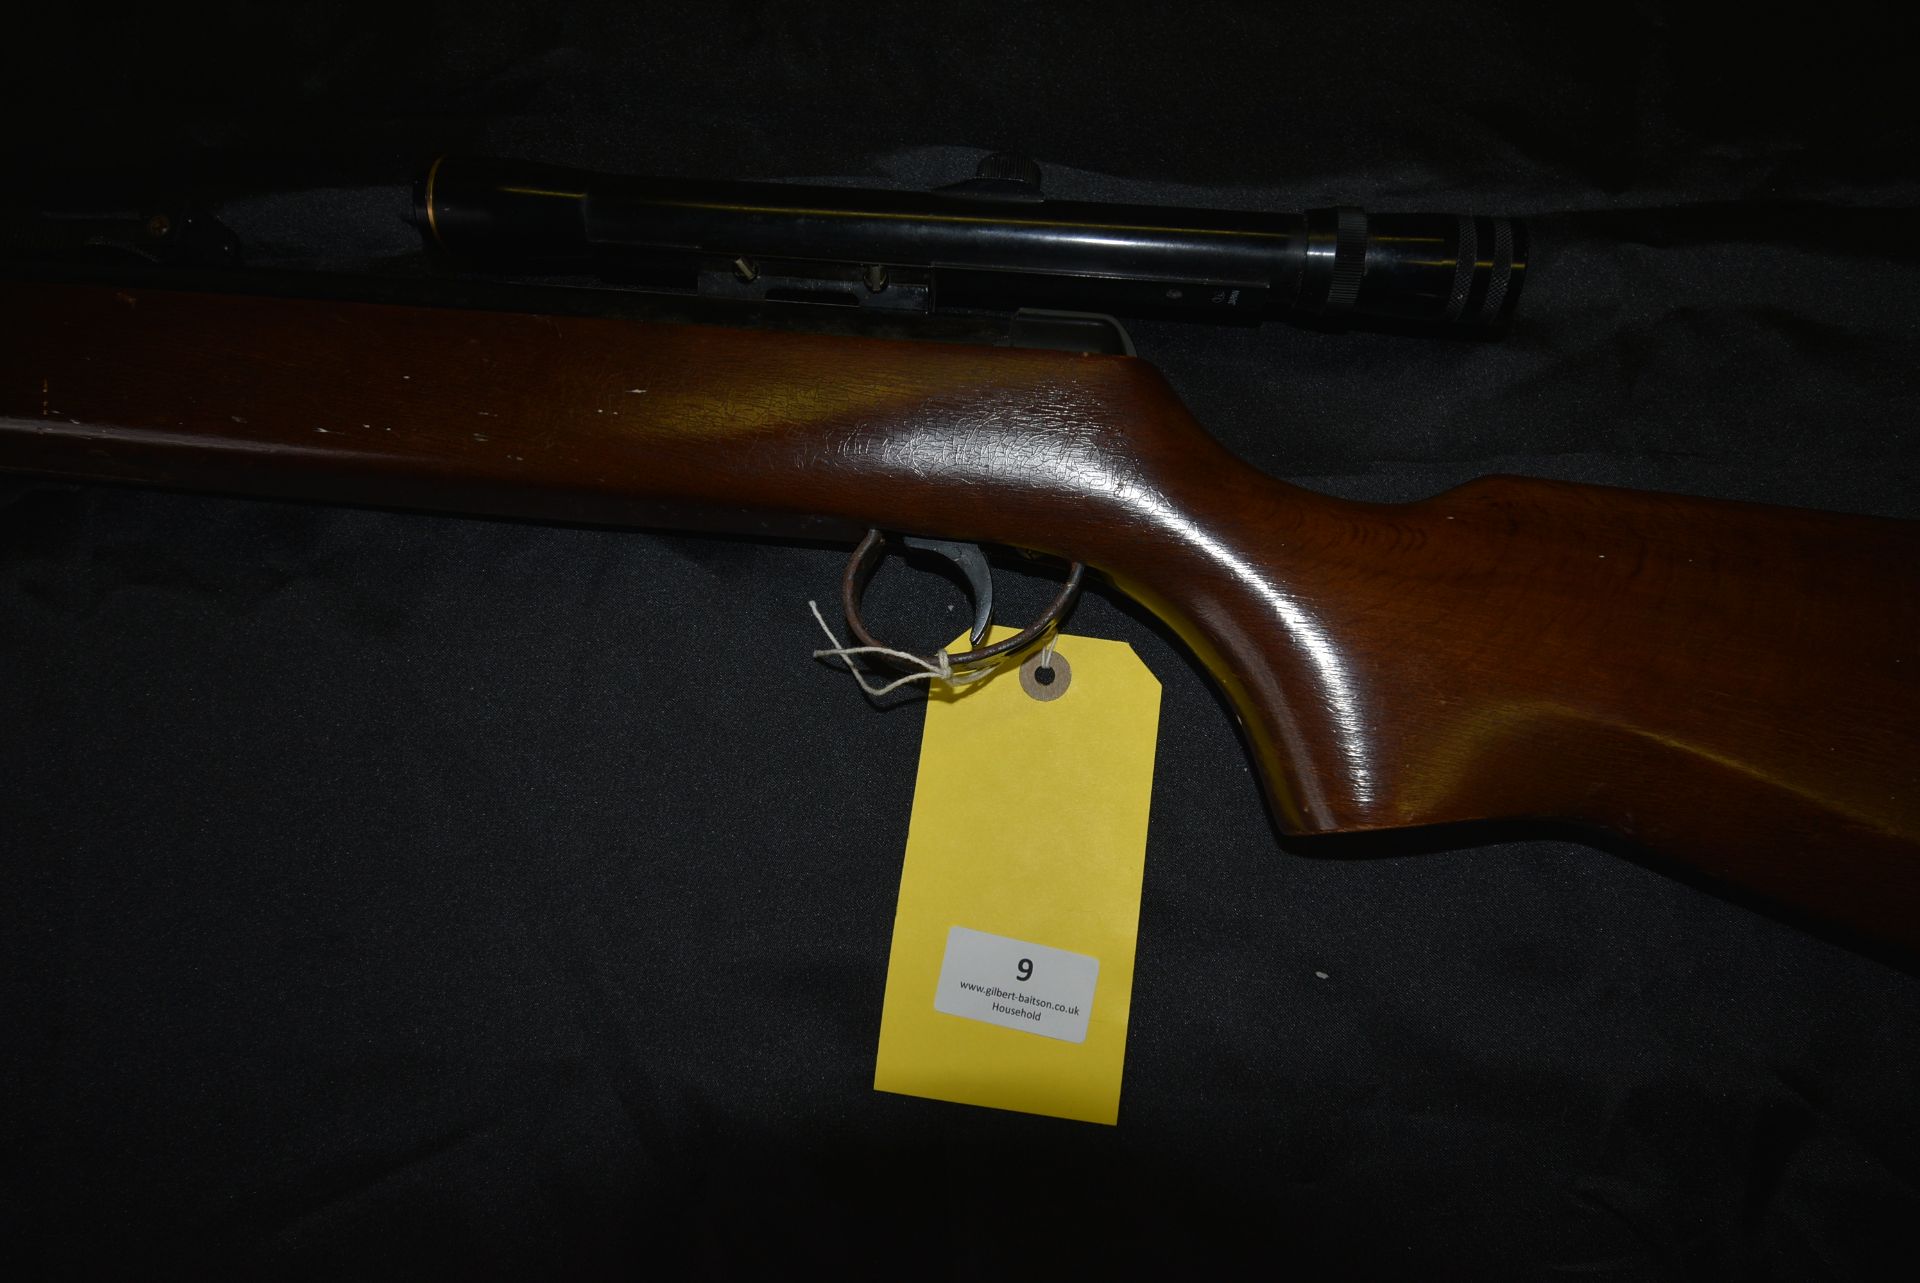 BSA Meteor 177 Air Rifle Serial No. NH82904 with RSA 40x20 Telescopic Sight - Image 2 of 4